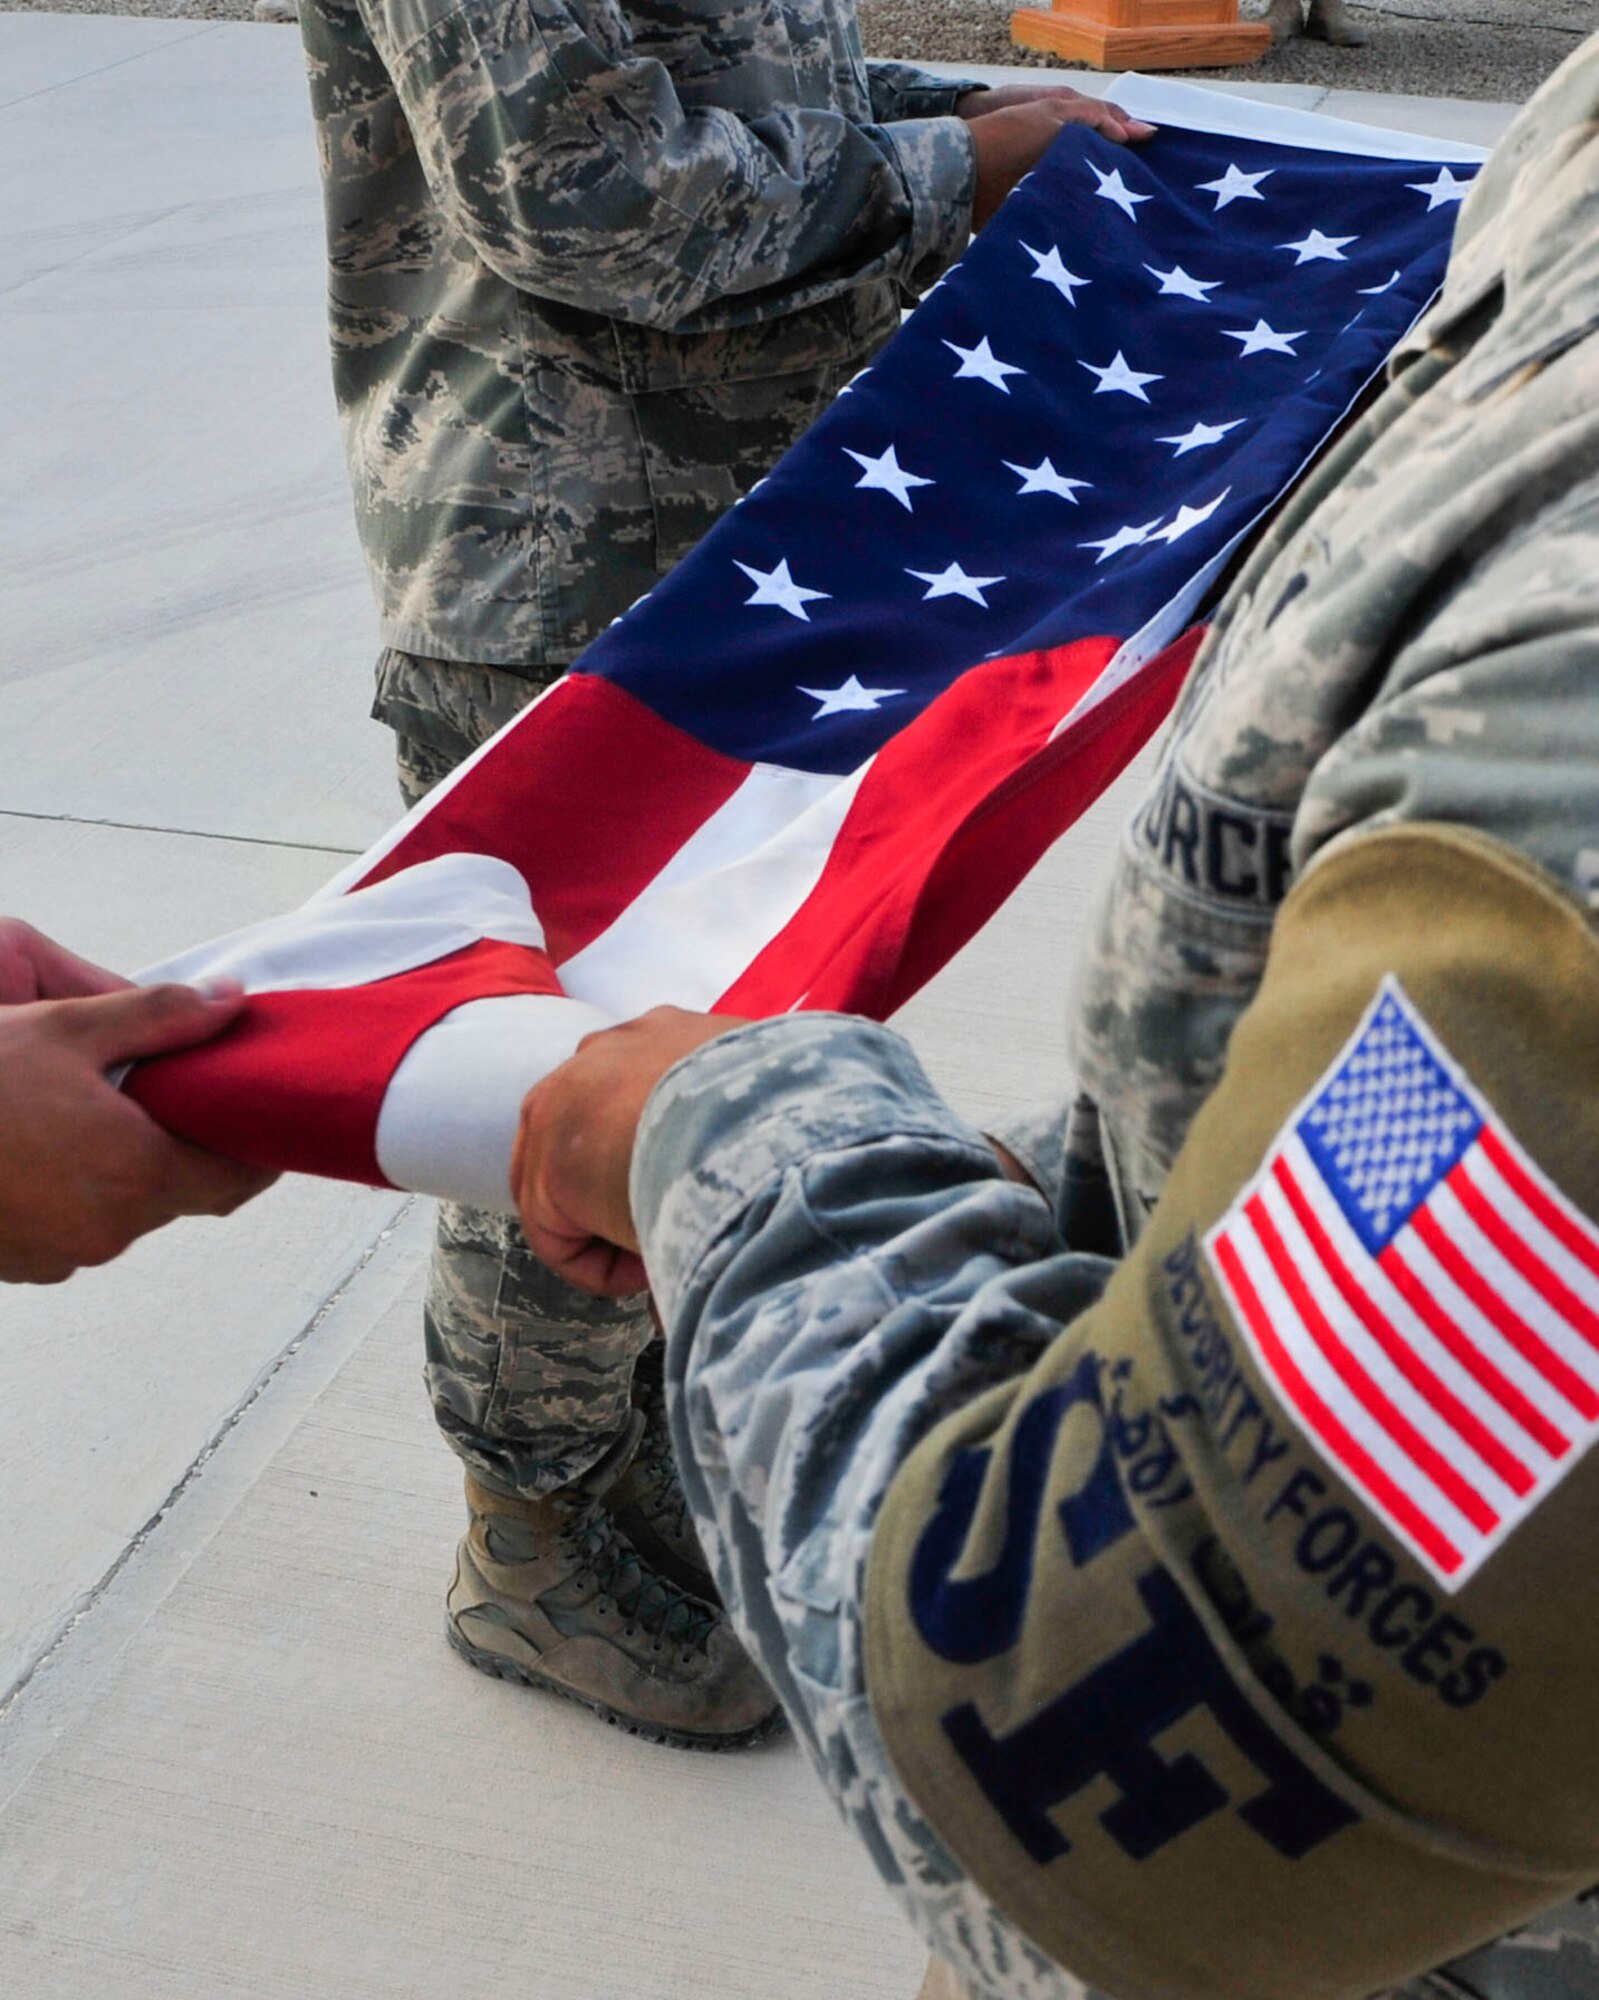 U.S. Air Force Airmen fold an American flag during a retreat ceremony recognizing the thirteenth anniversary of Sept. 11, 2001, at Al Udeid Air Base, Qatar, Sept. 11, 2014.The retreat ceremony signals the end of the official duty day and serves as a ceremony for paying respect to the flag. In this ceremony, respect was paid to the flag and the memory of those lost on Sept. 11, 2001. (U.S. Air Force photo by Senior Airman Colin Cates)  